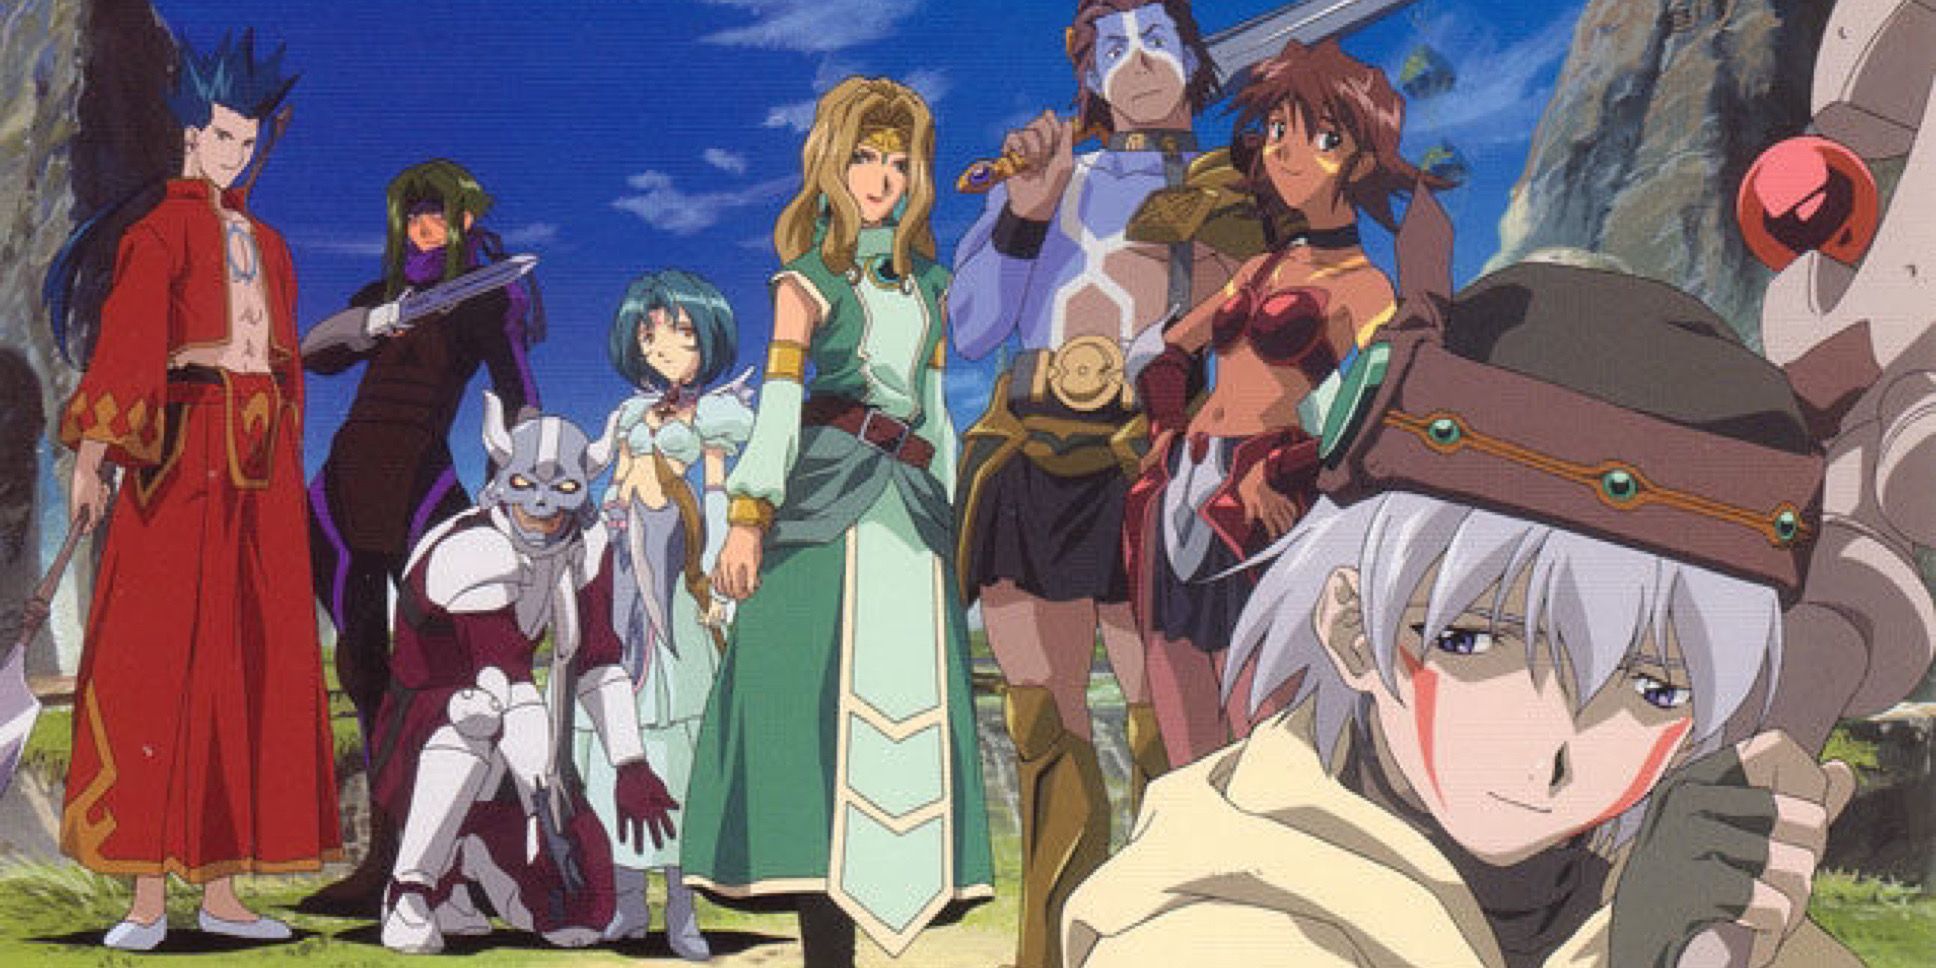 Group of the main characters from .hack//sign.